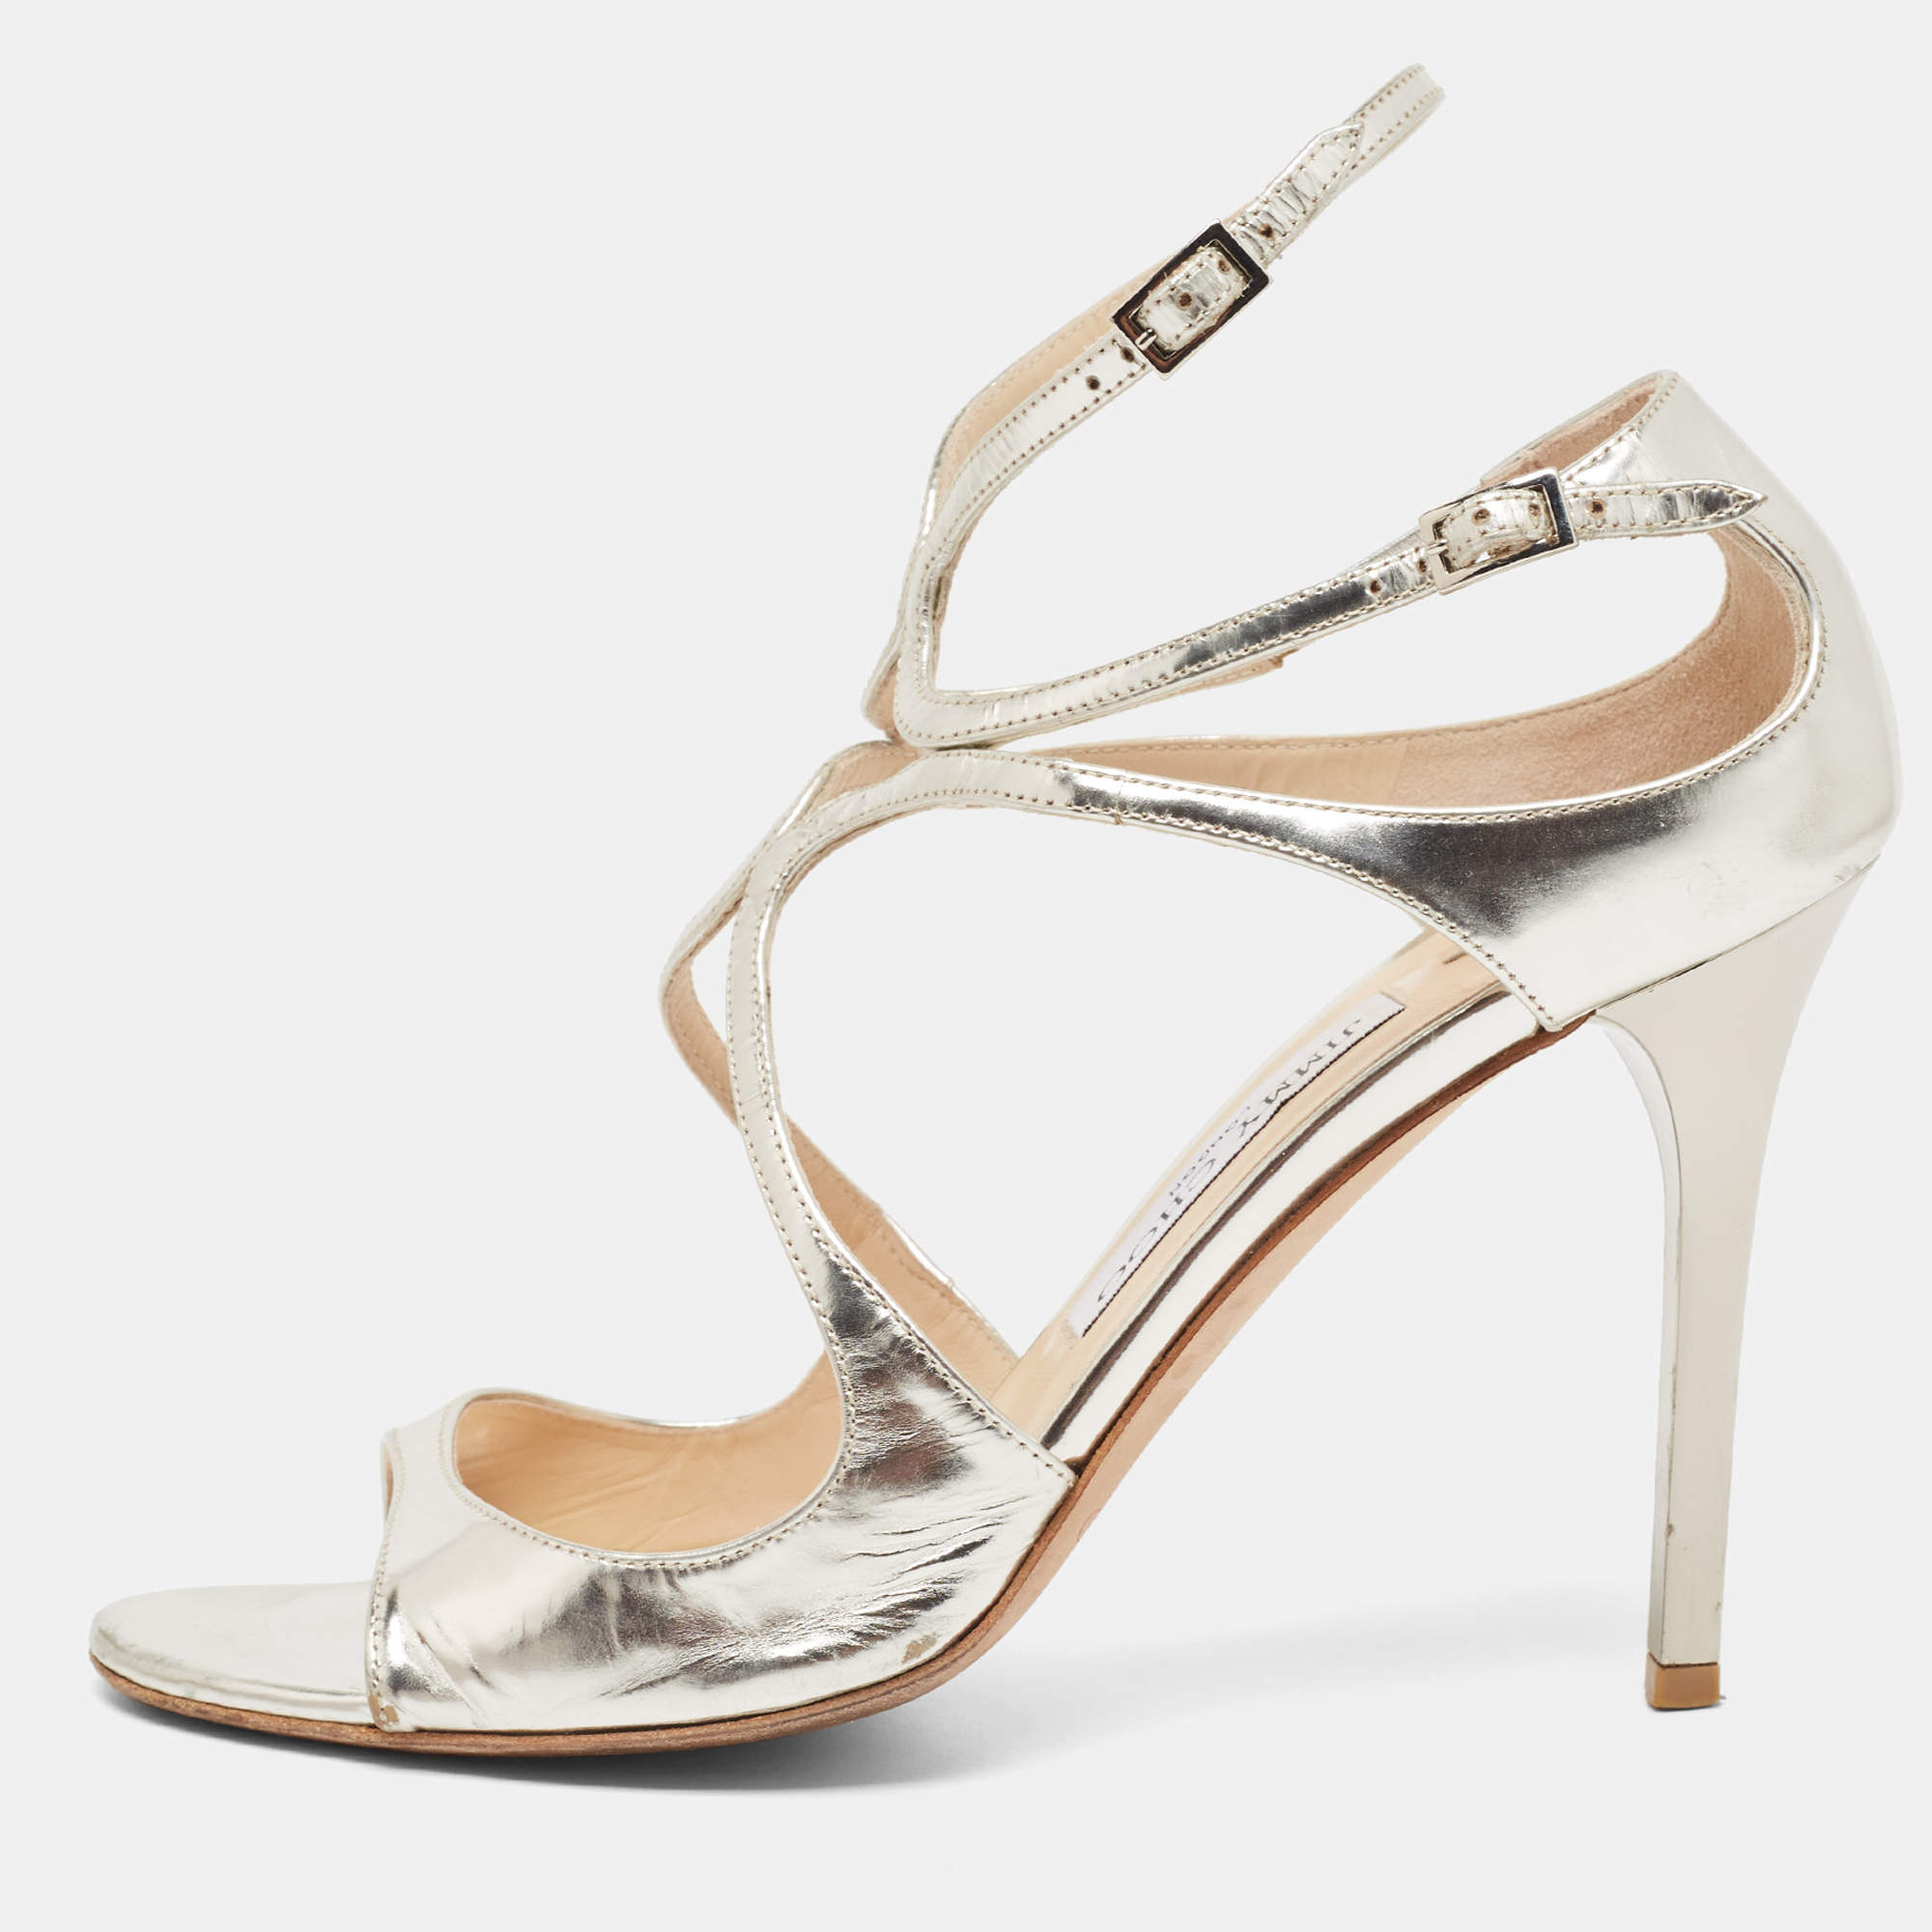 Jimmy Choo Metallic Silver Foil Leather Lang Strappy Sandals Size 39